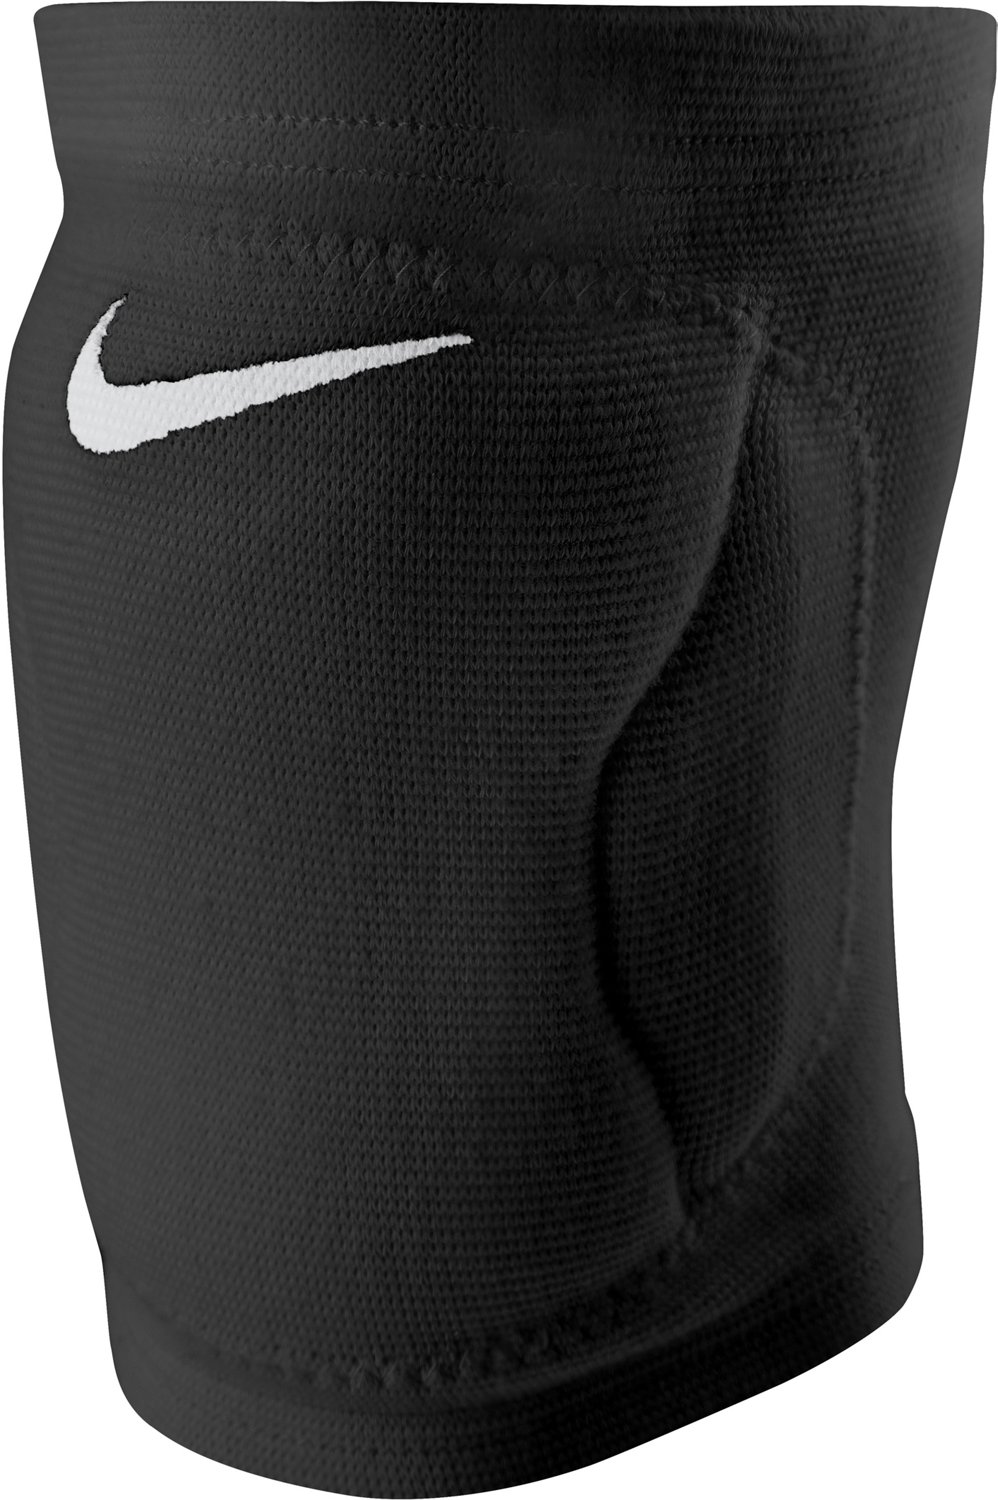 Varsity Knee Pad - Volleyball Town